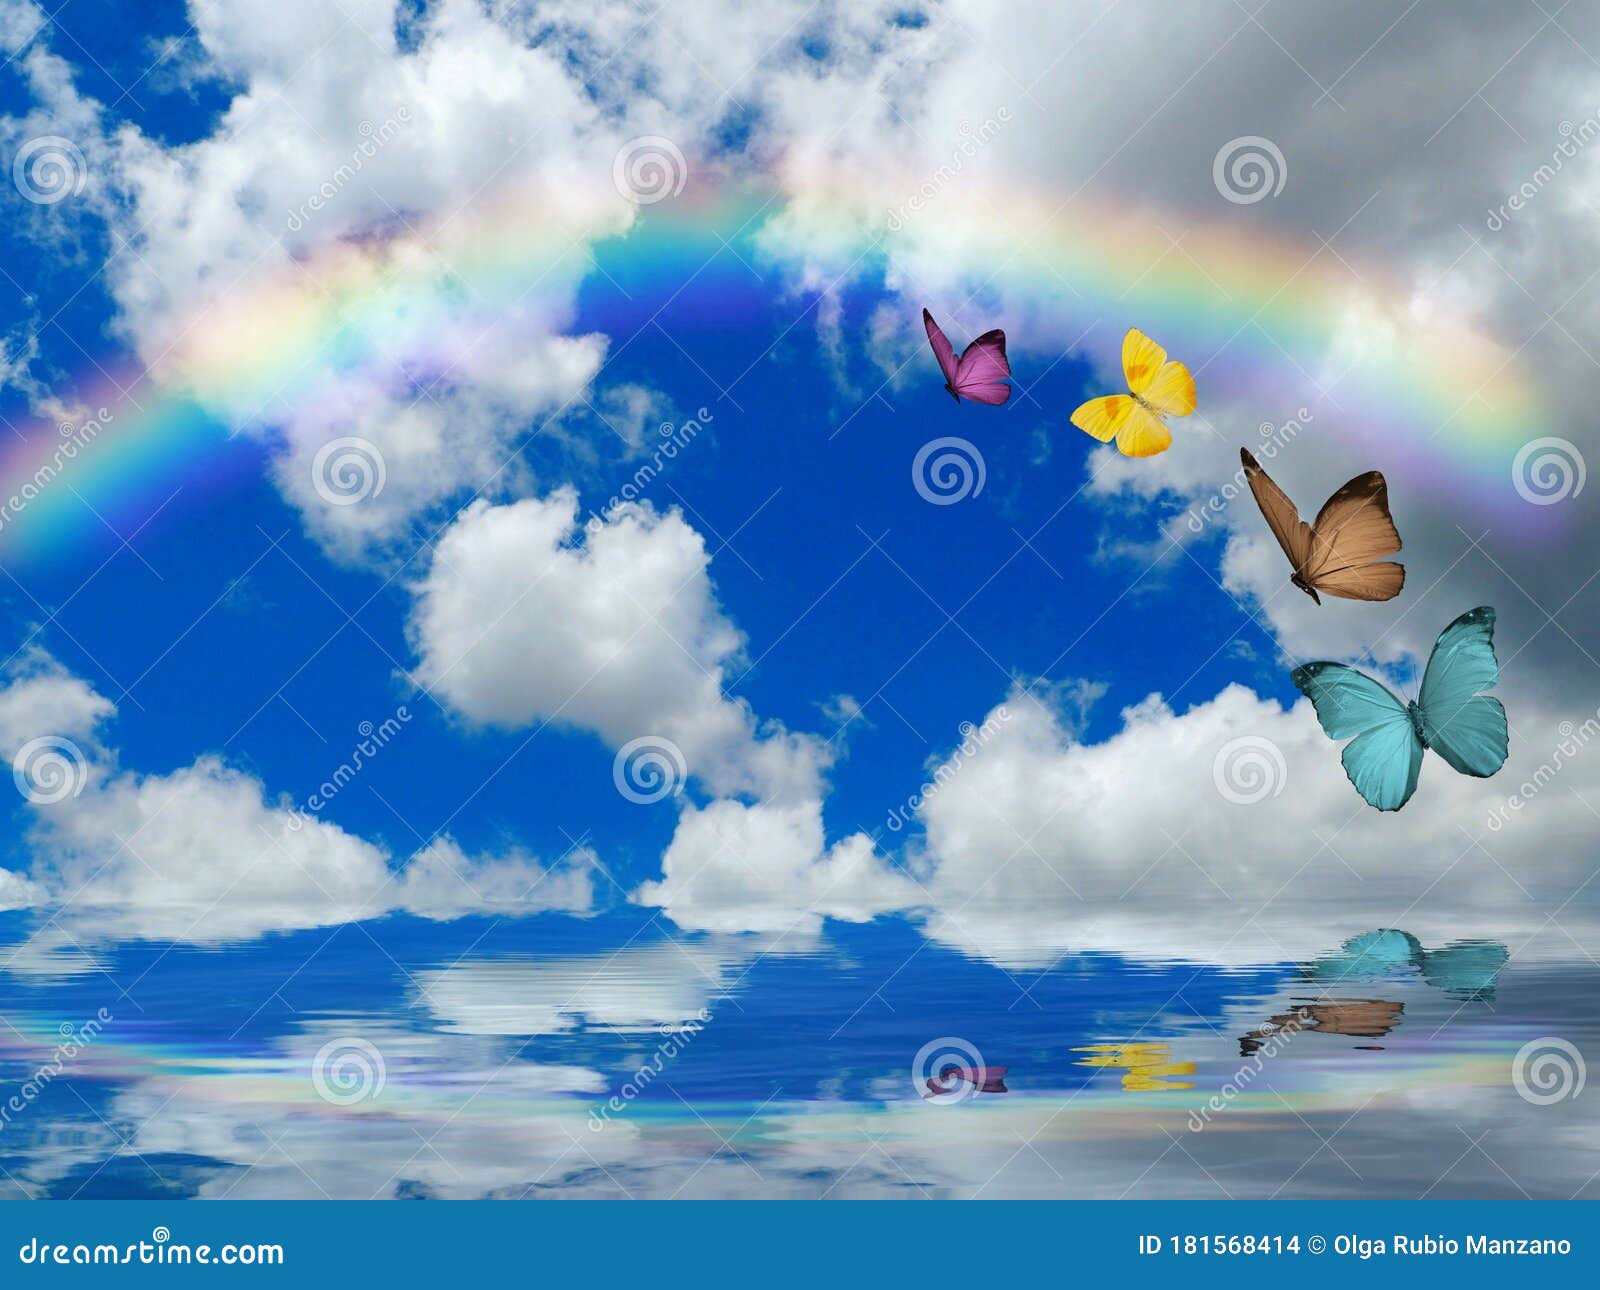 natural background with rainbow in sea reflection